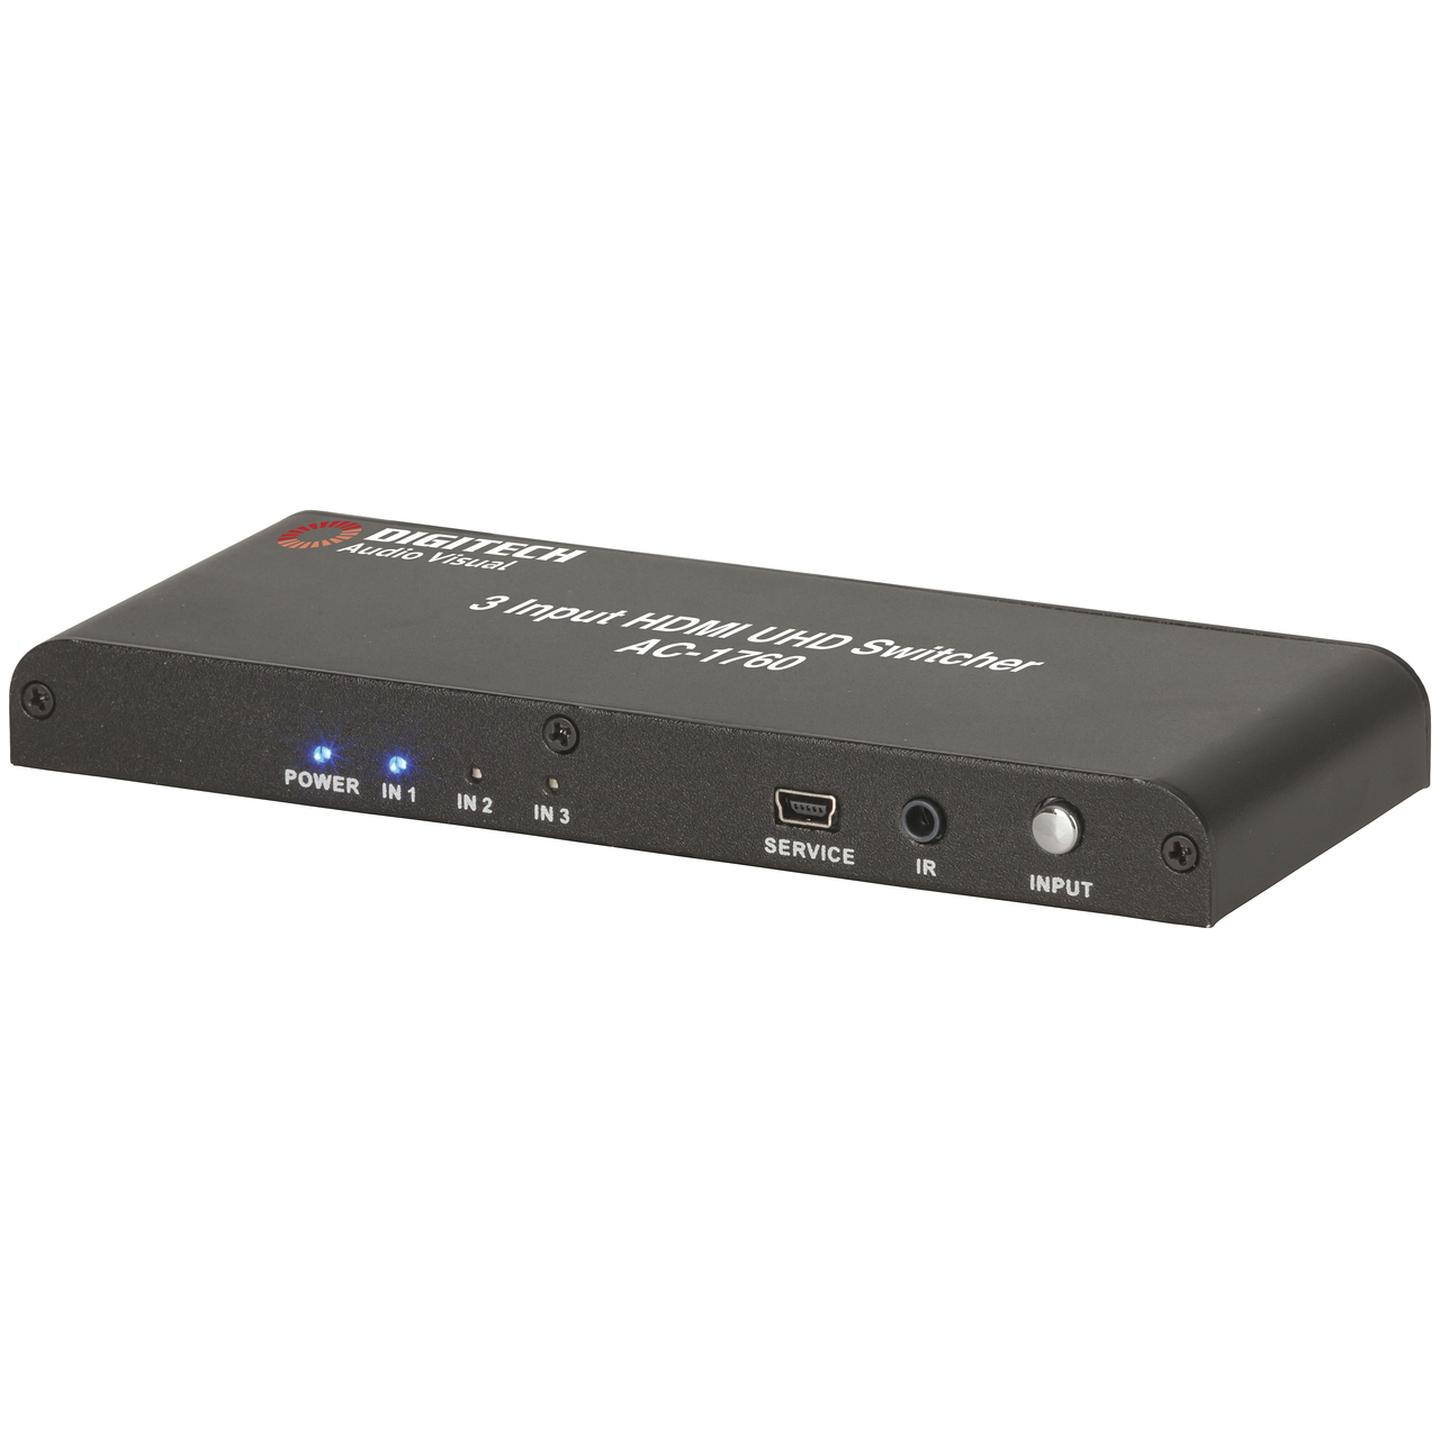 3 Way HDMI 2.0 Switcher with Remote